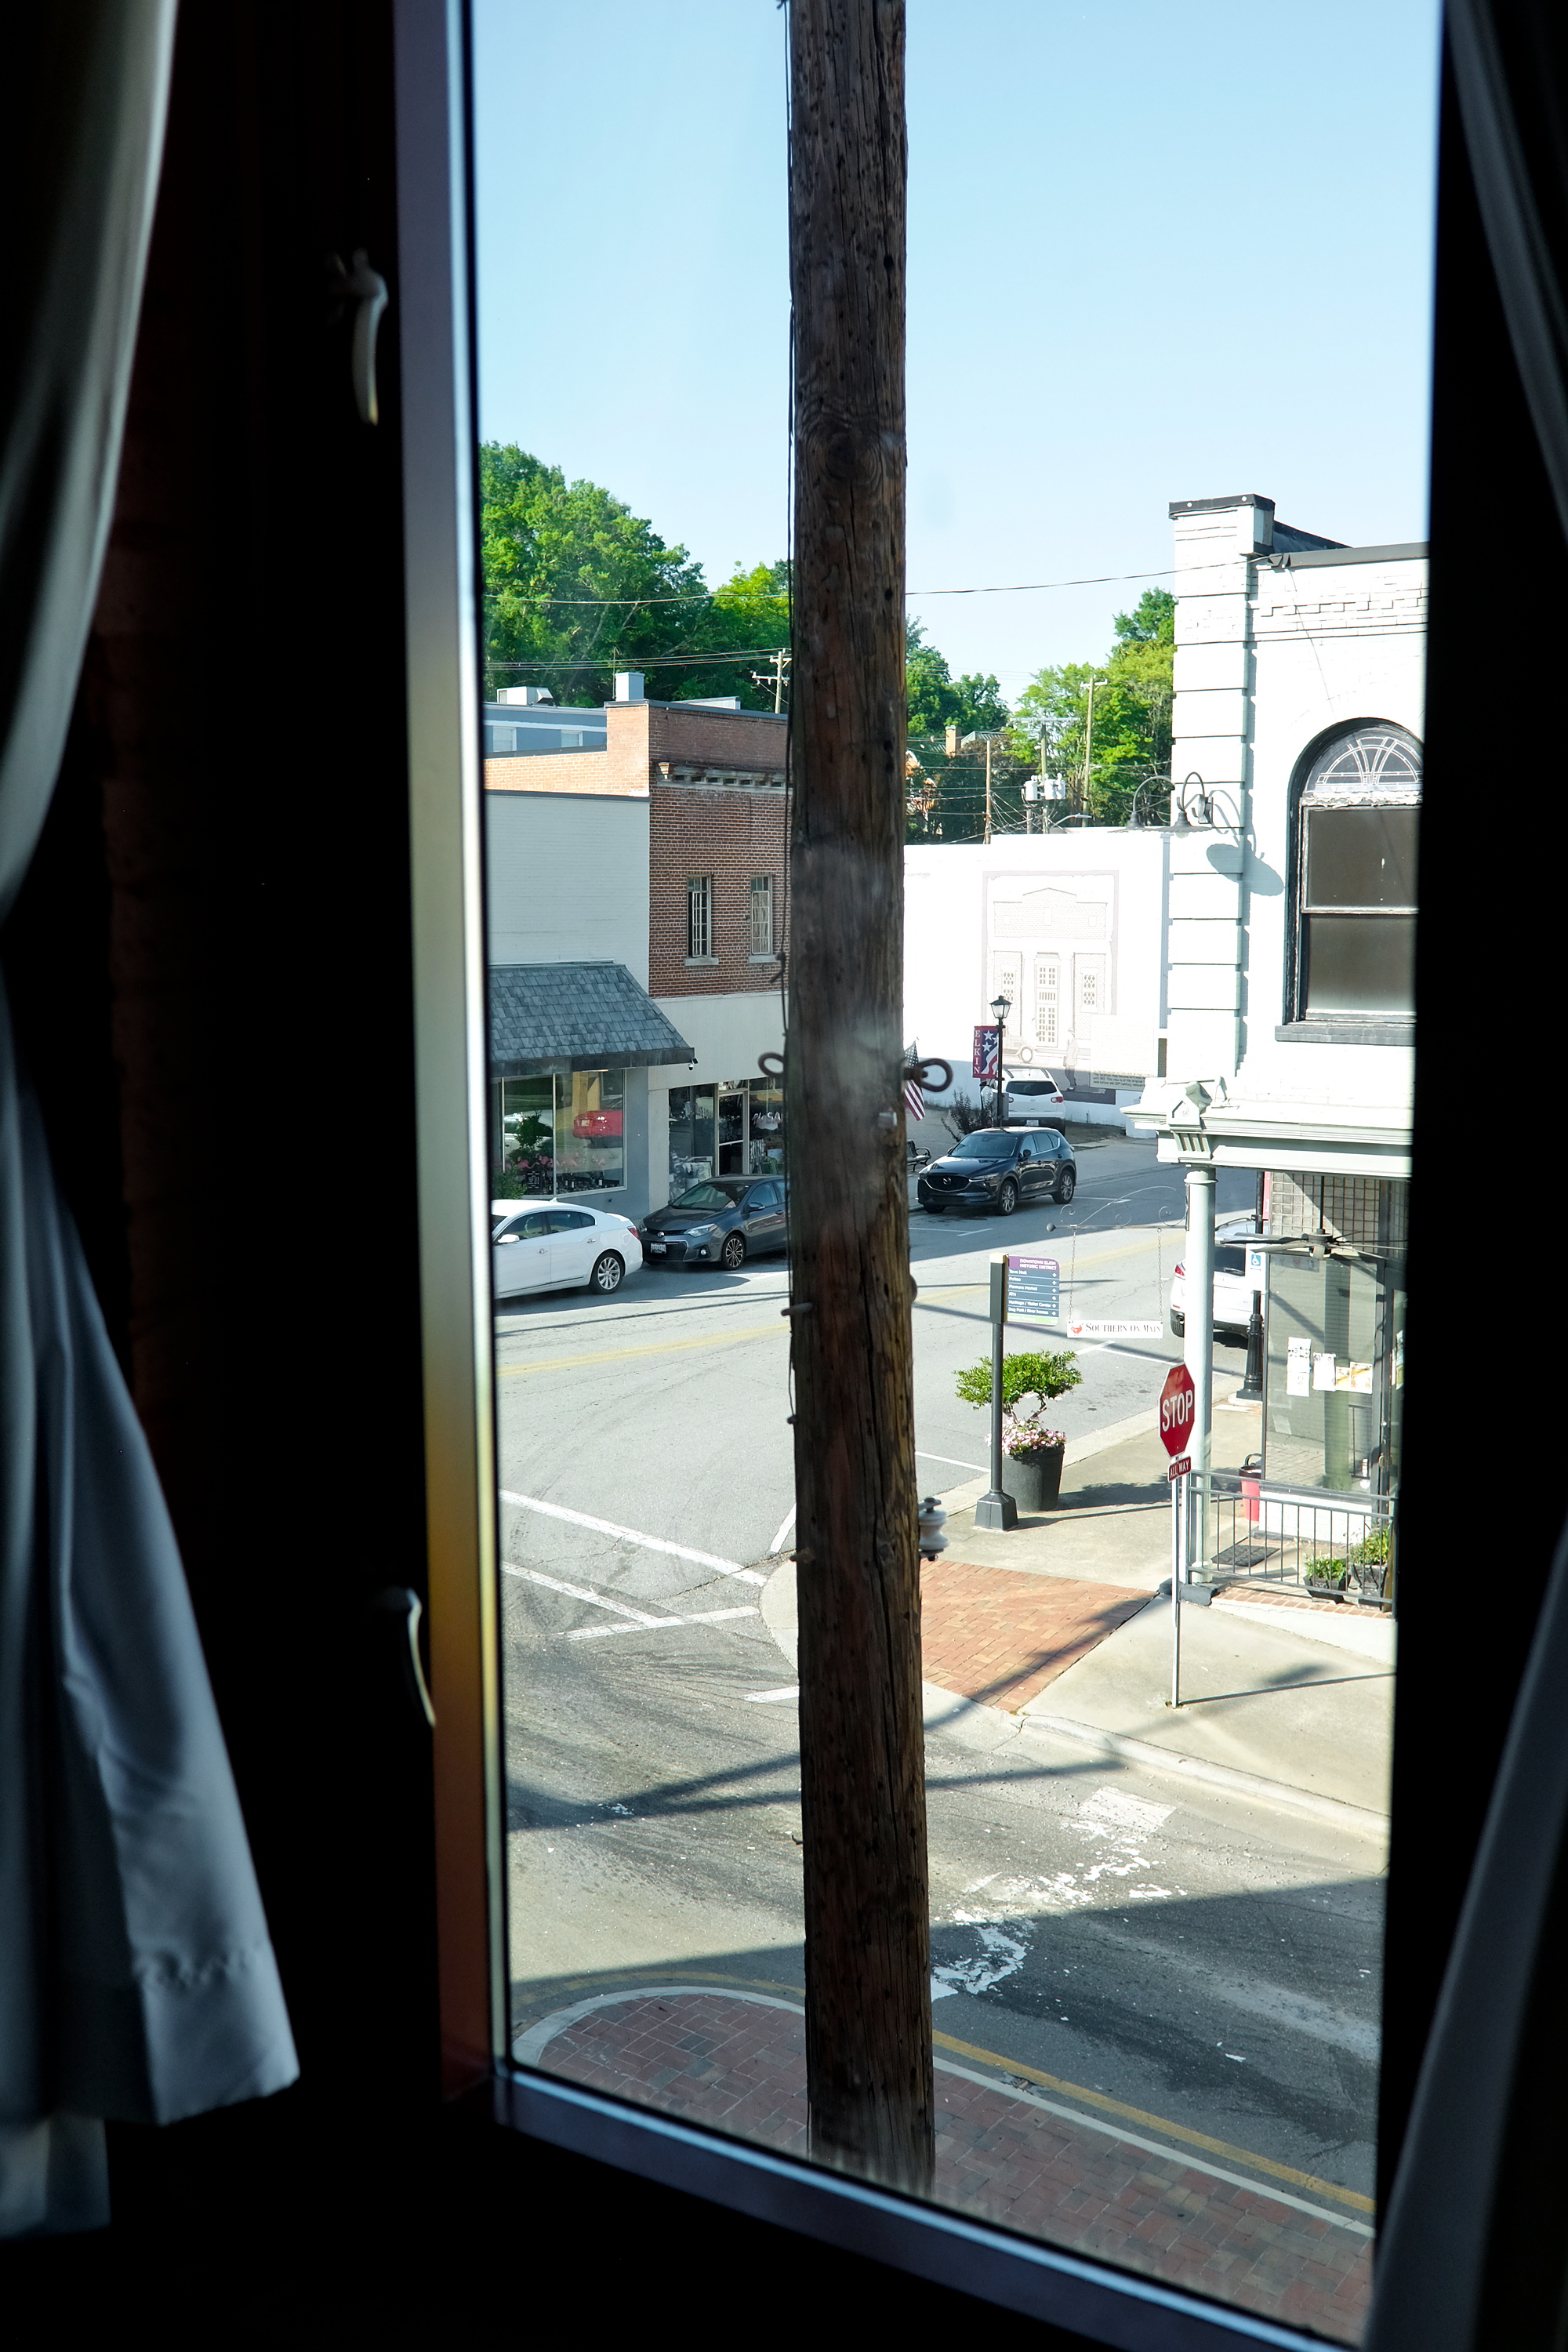 View of Main Street Elkin from the room